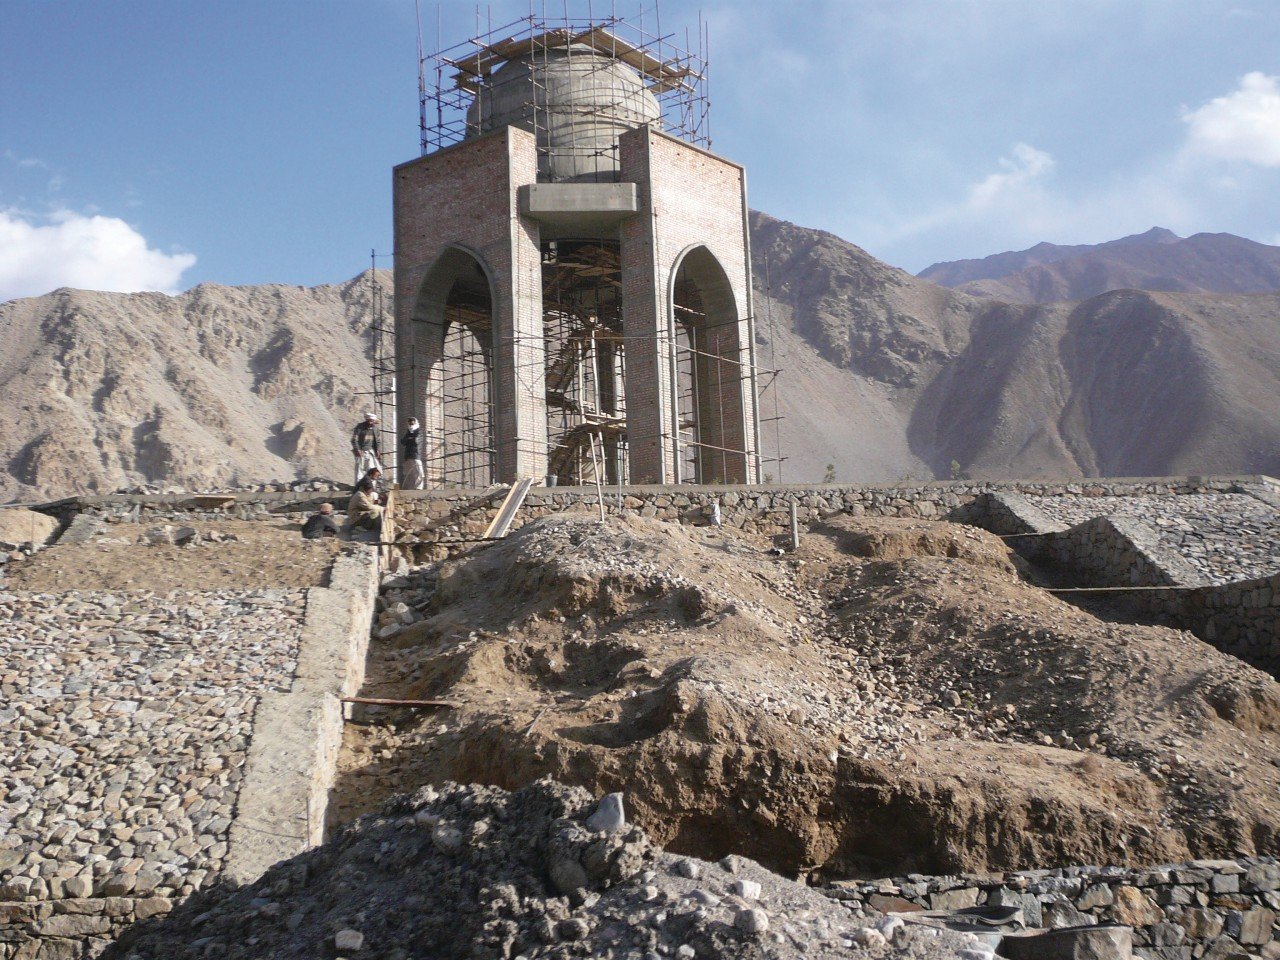 Day2 : Excursion in the Panjshir Valley to the Mausoleum of Massoud